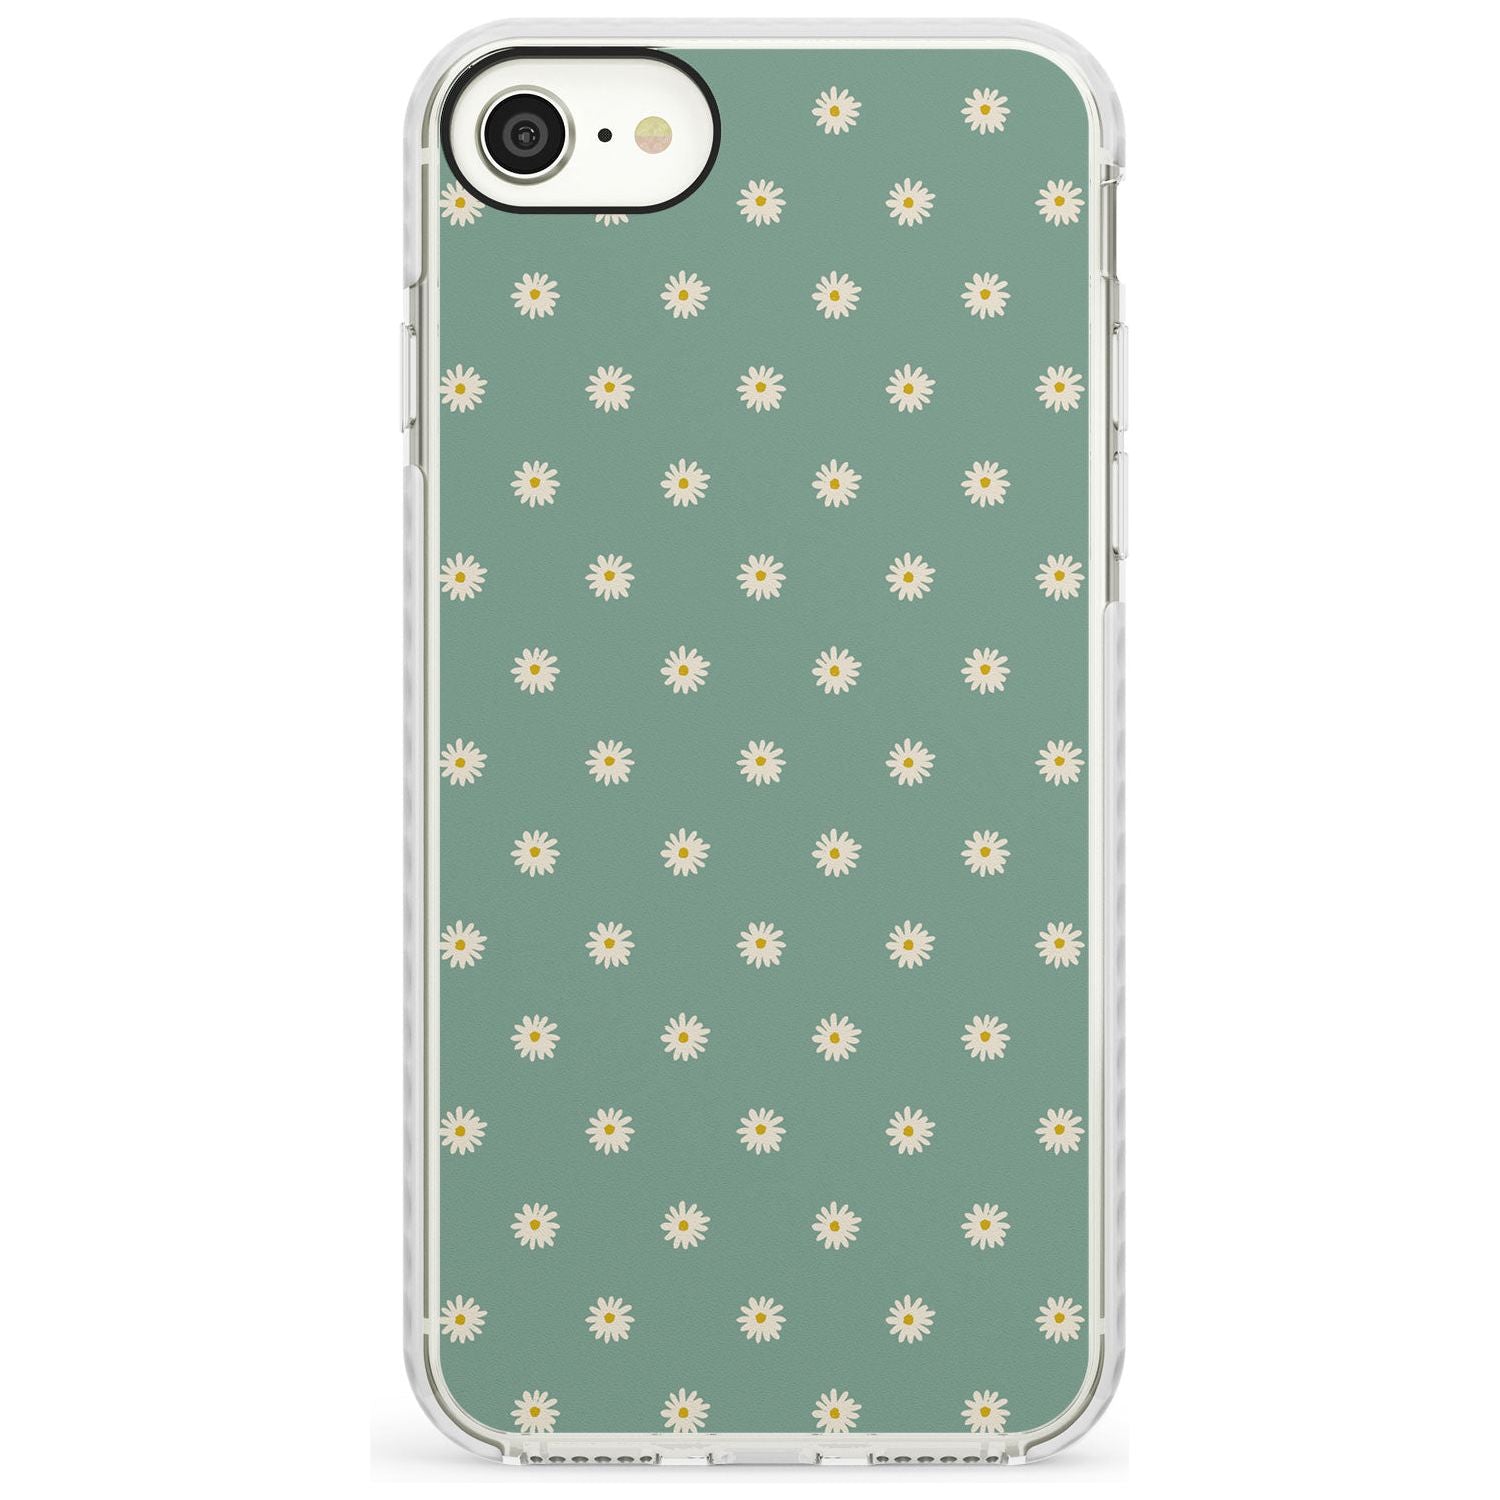 Daisy Pattern - Teal Cute Floral Daisy Design Slim TPU Phone Case for iPhone SE 8 7 Plus